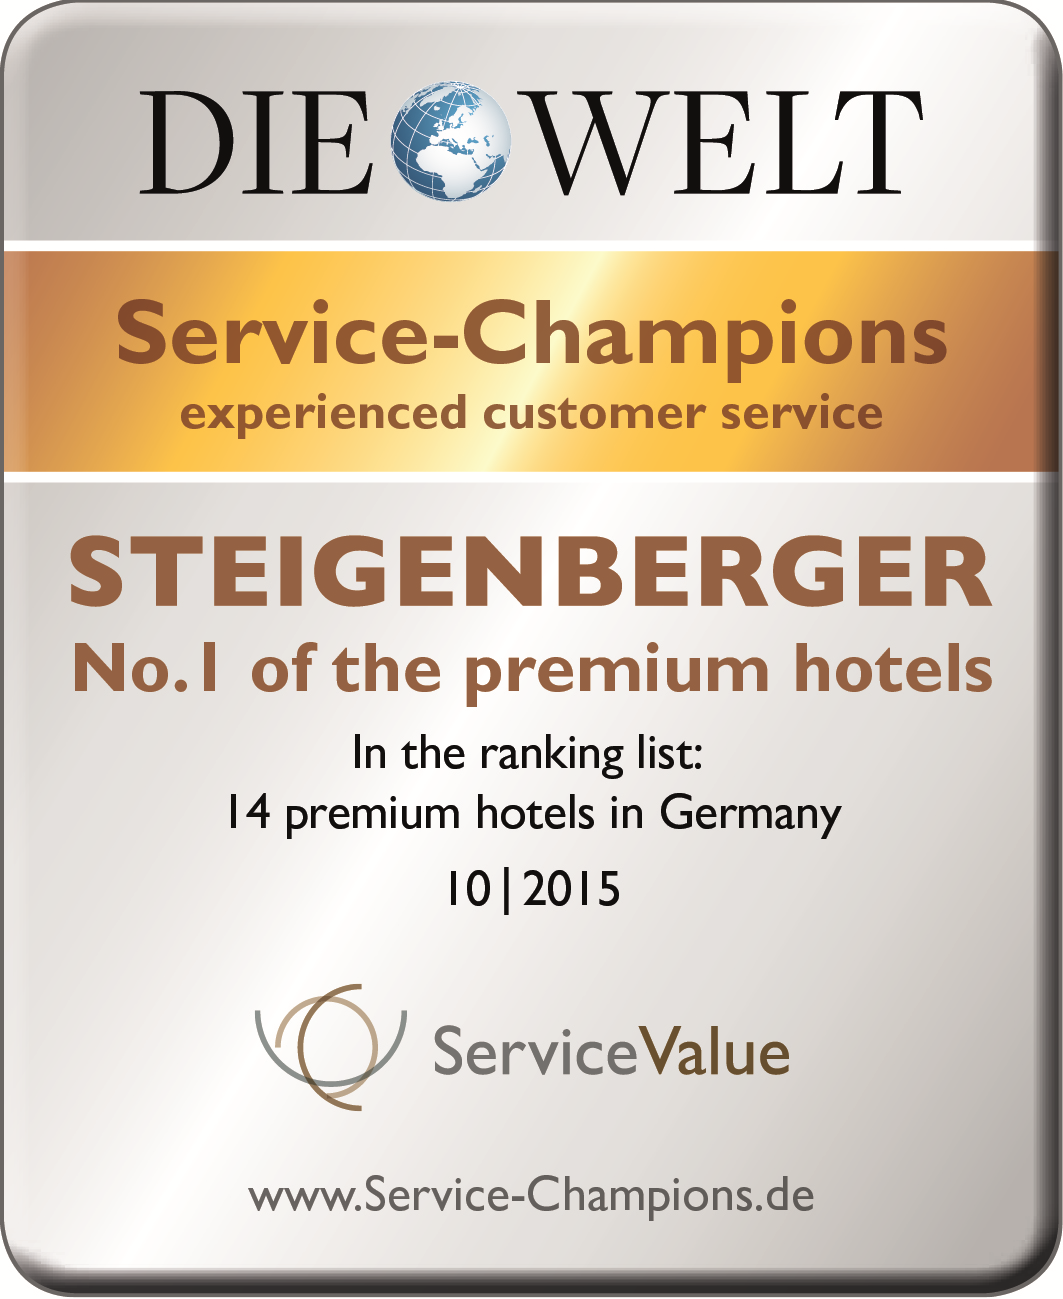 Steigenberger Hotels and Resorts won "Service Champion Award" for the fourth time in a row 